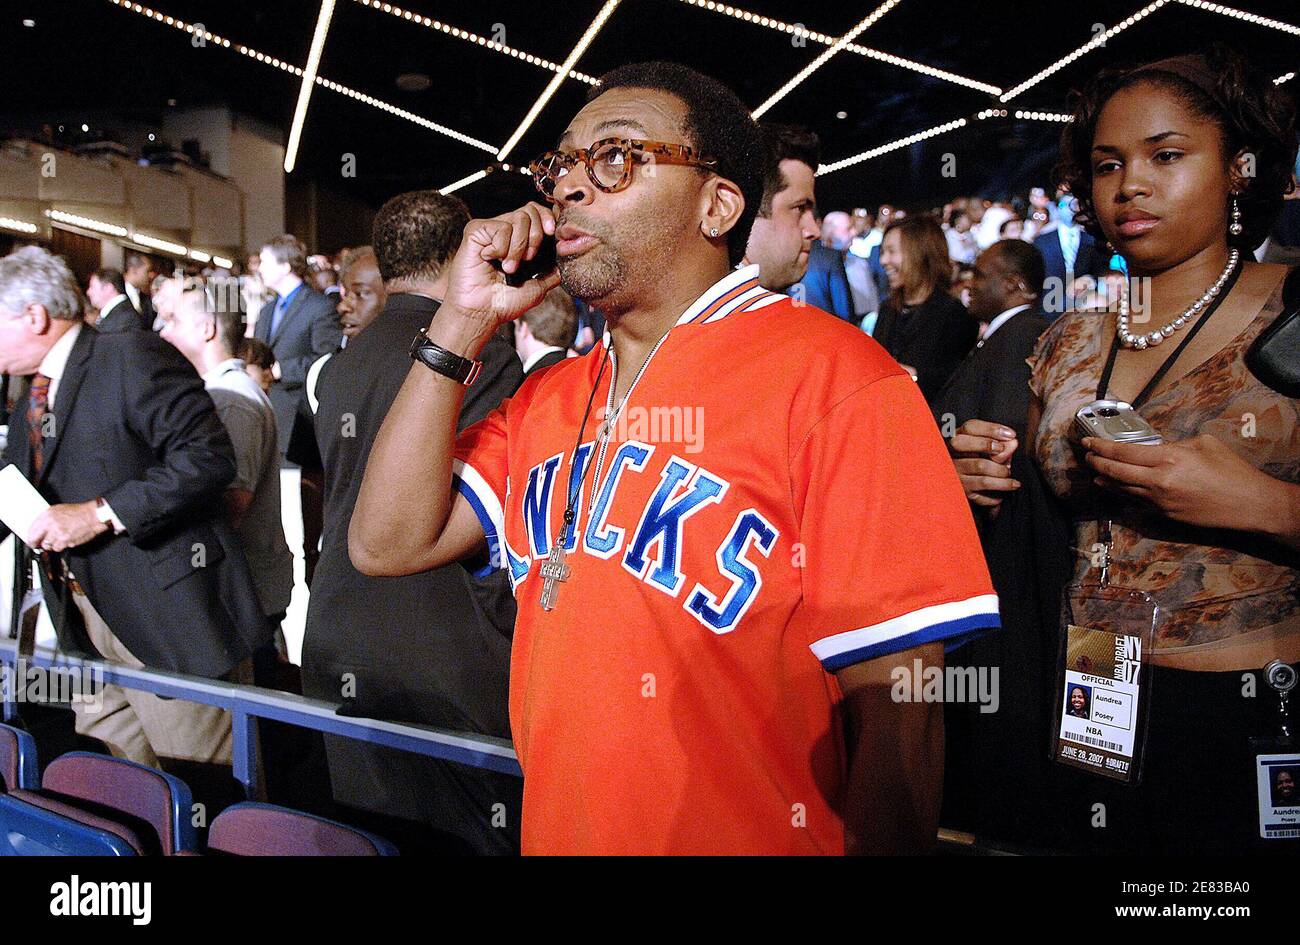 Director Spike Lee, one of the biggest basketball fan, attends the NBA  Draft 2007 held at the Madison Square Garden in New York City, NY, USA on  June 28, 2007. Photo by